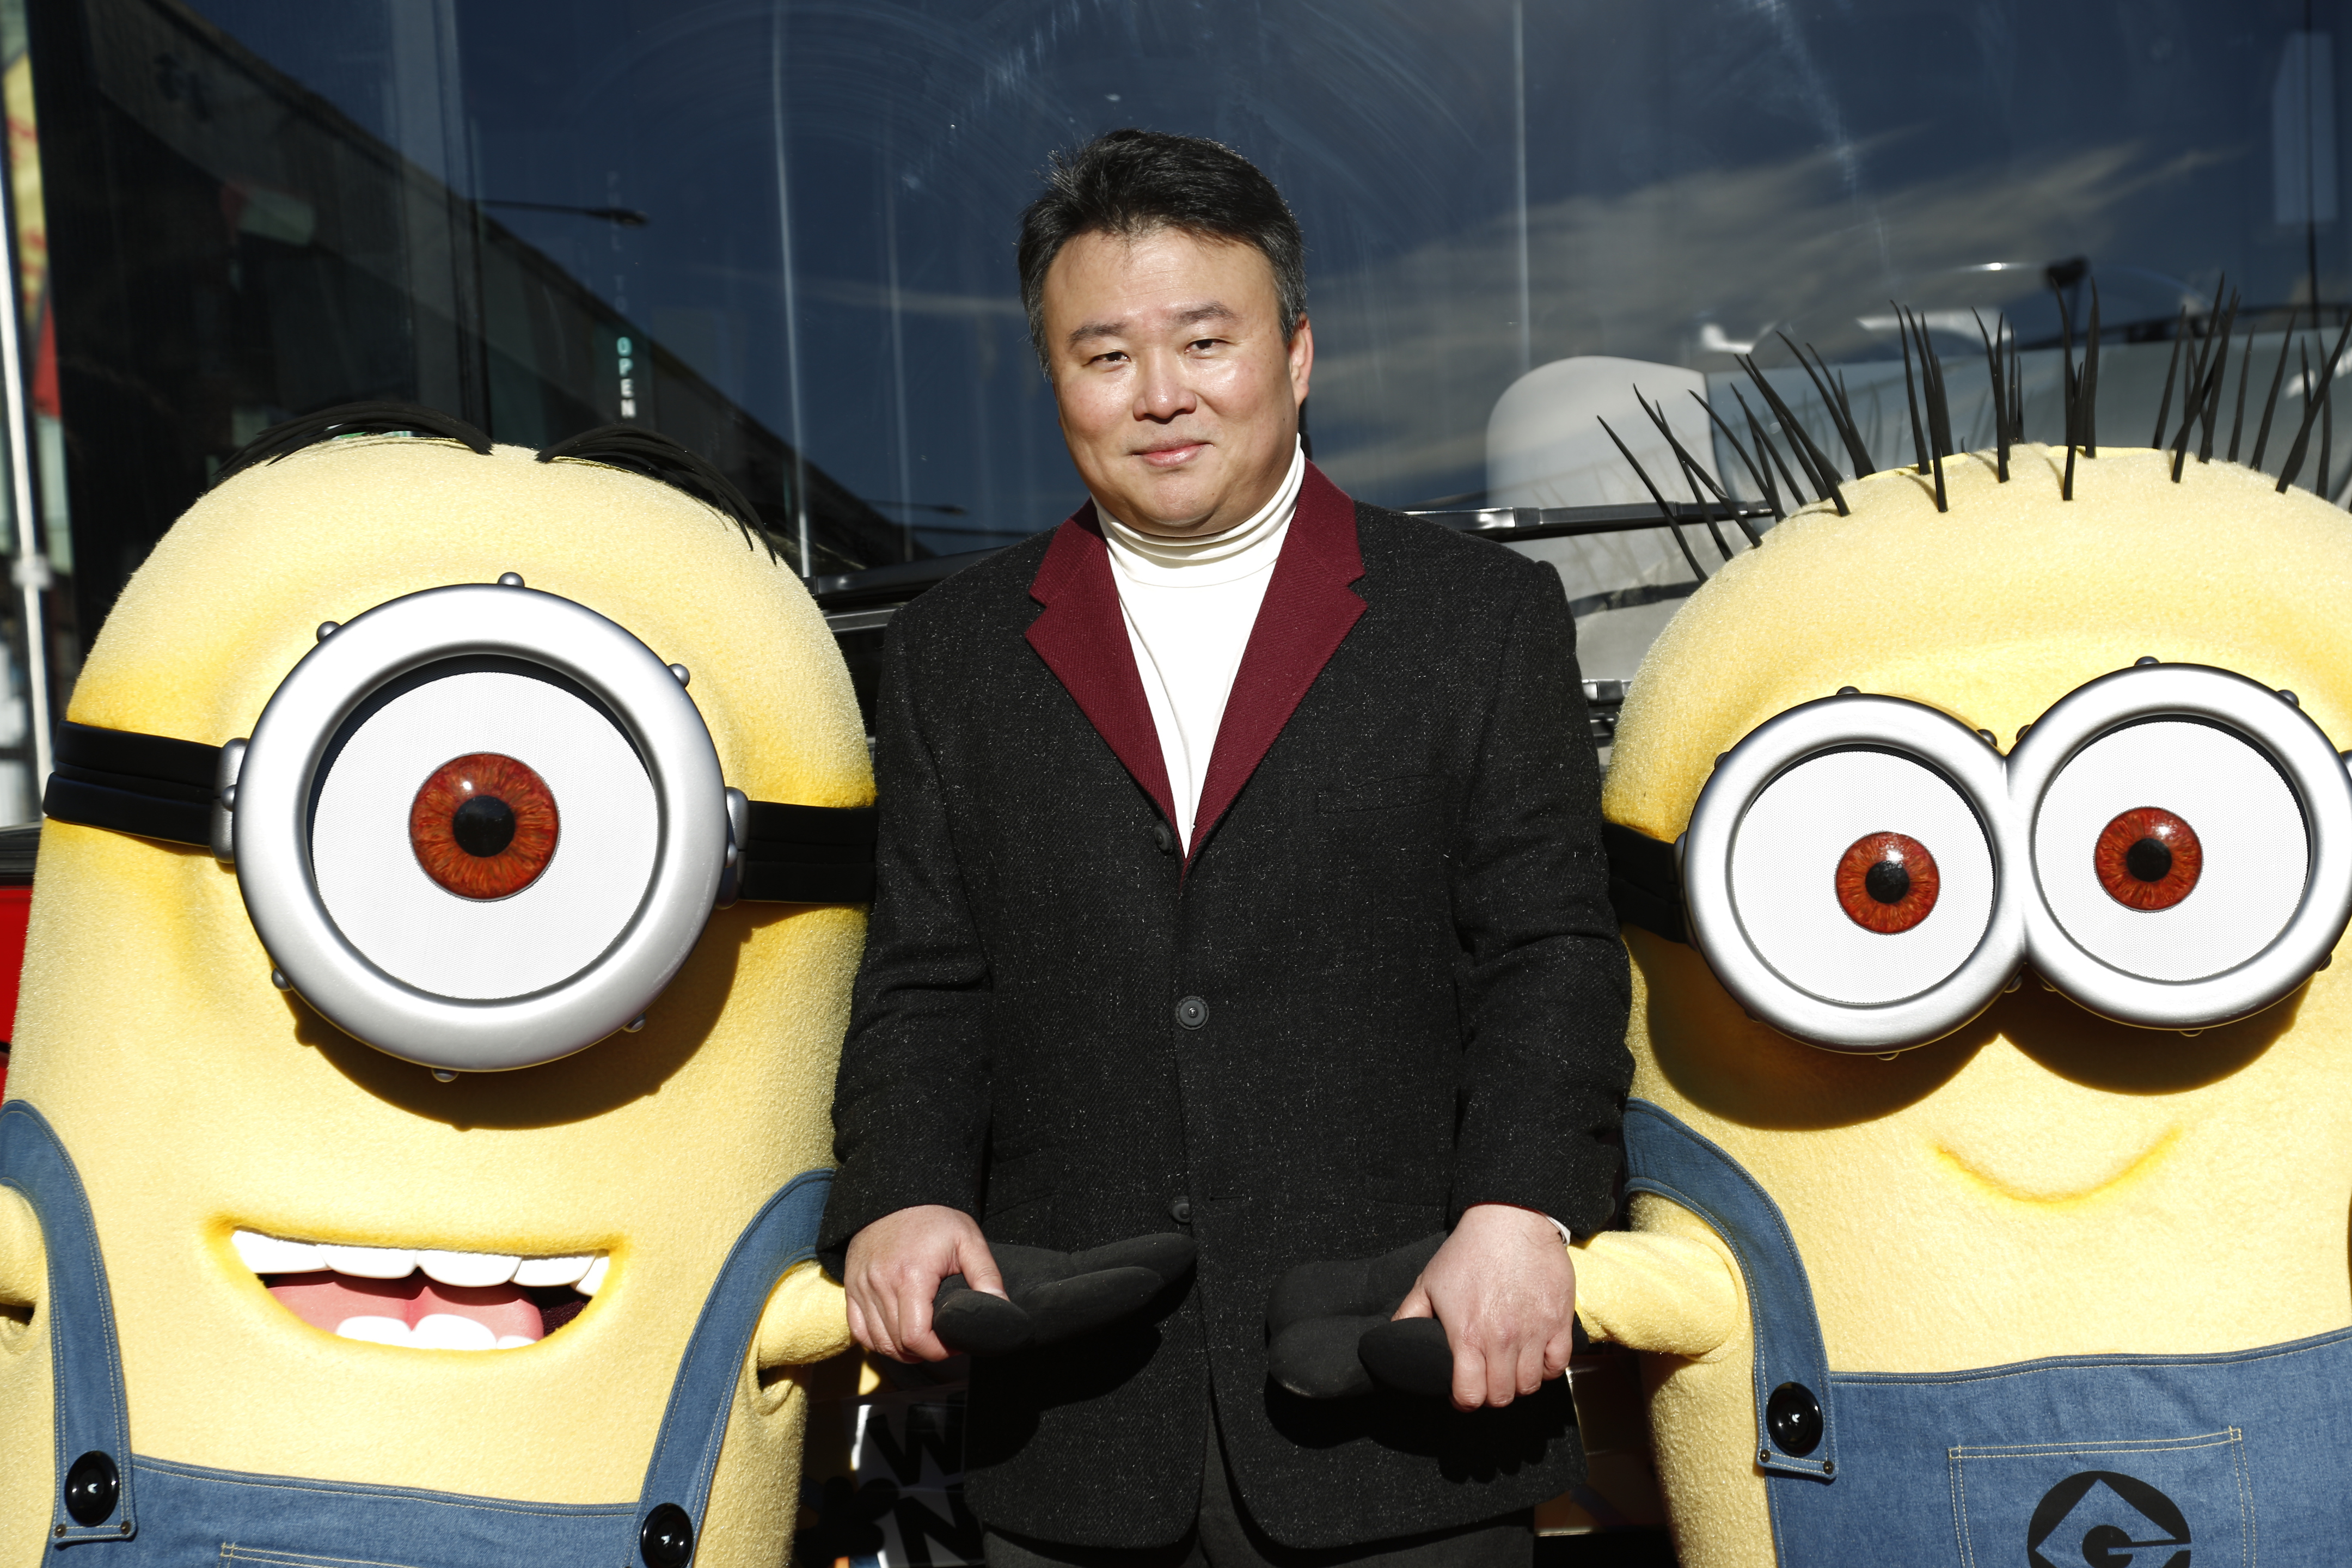 David W. Chien with The Minions at Ride of Fame (November 25th, 2013).